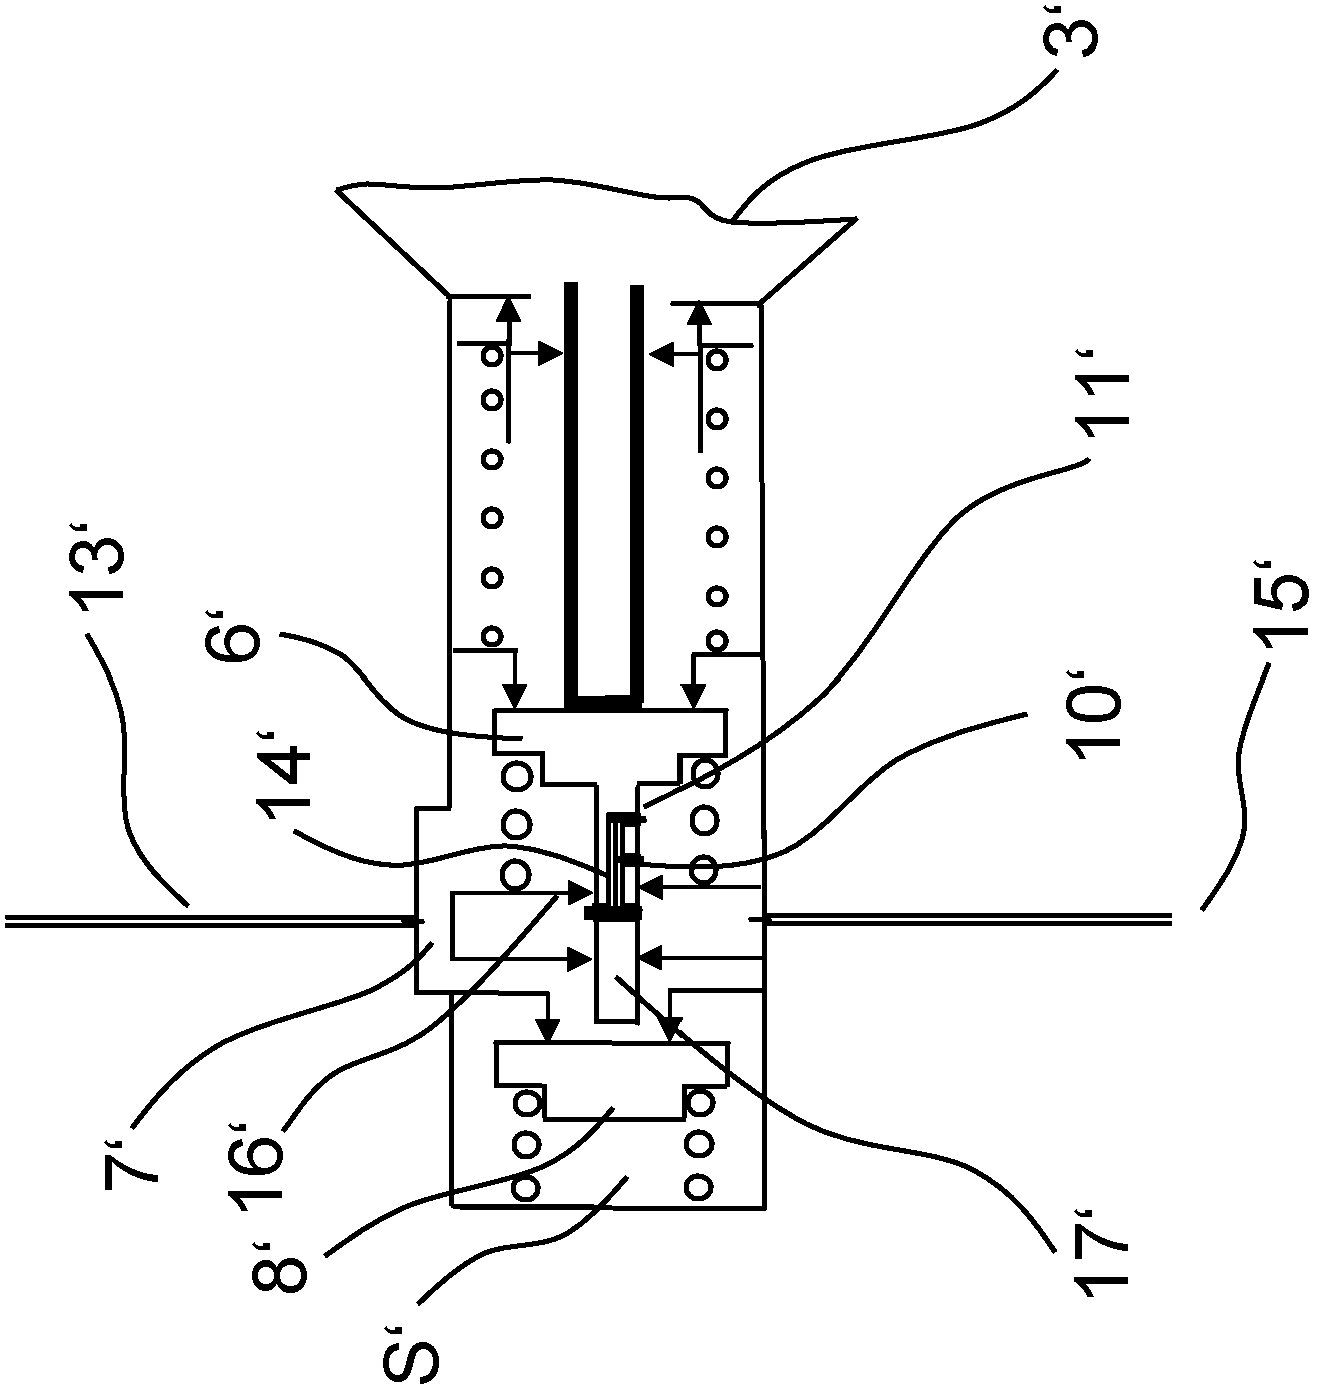 Control valve having a variable nozzle cross-section for automatic compressed-air brakes